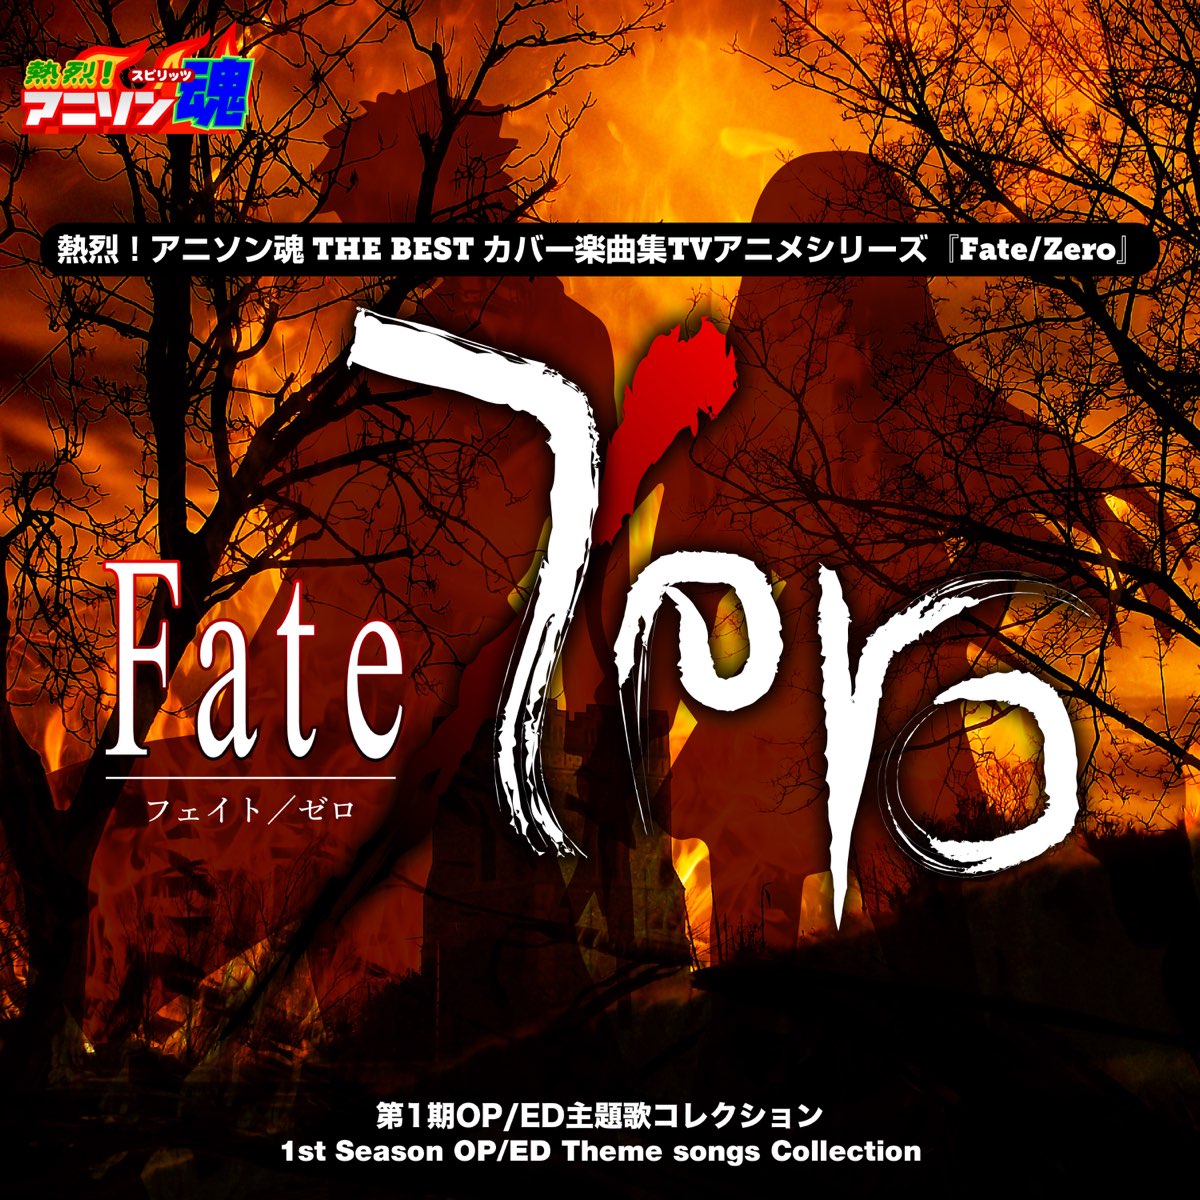 Ani Song Spirit No 1 The Best Cover Music Selection Tv Anime Series Fate Zero 1st Season Op Ed Theme Songs Collection Single By Nachamoroll On Apple Music